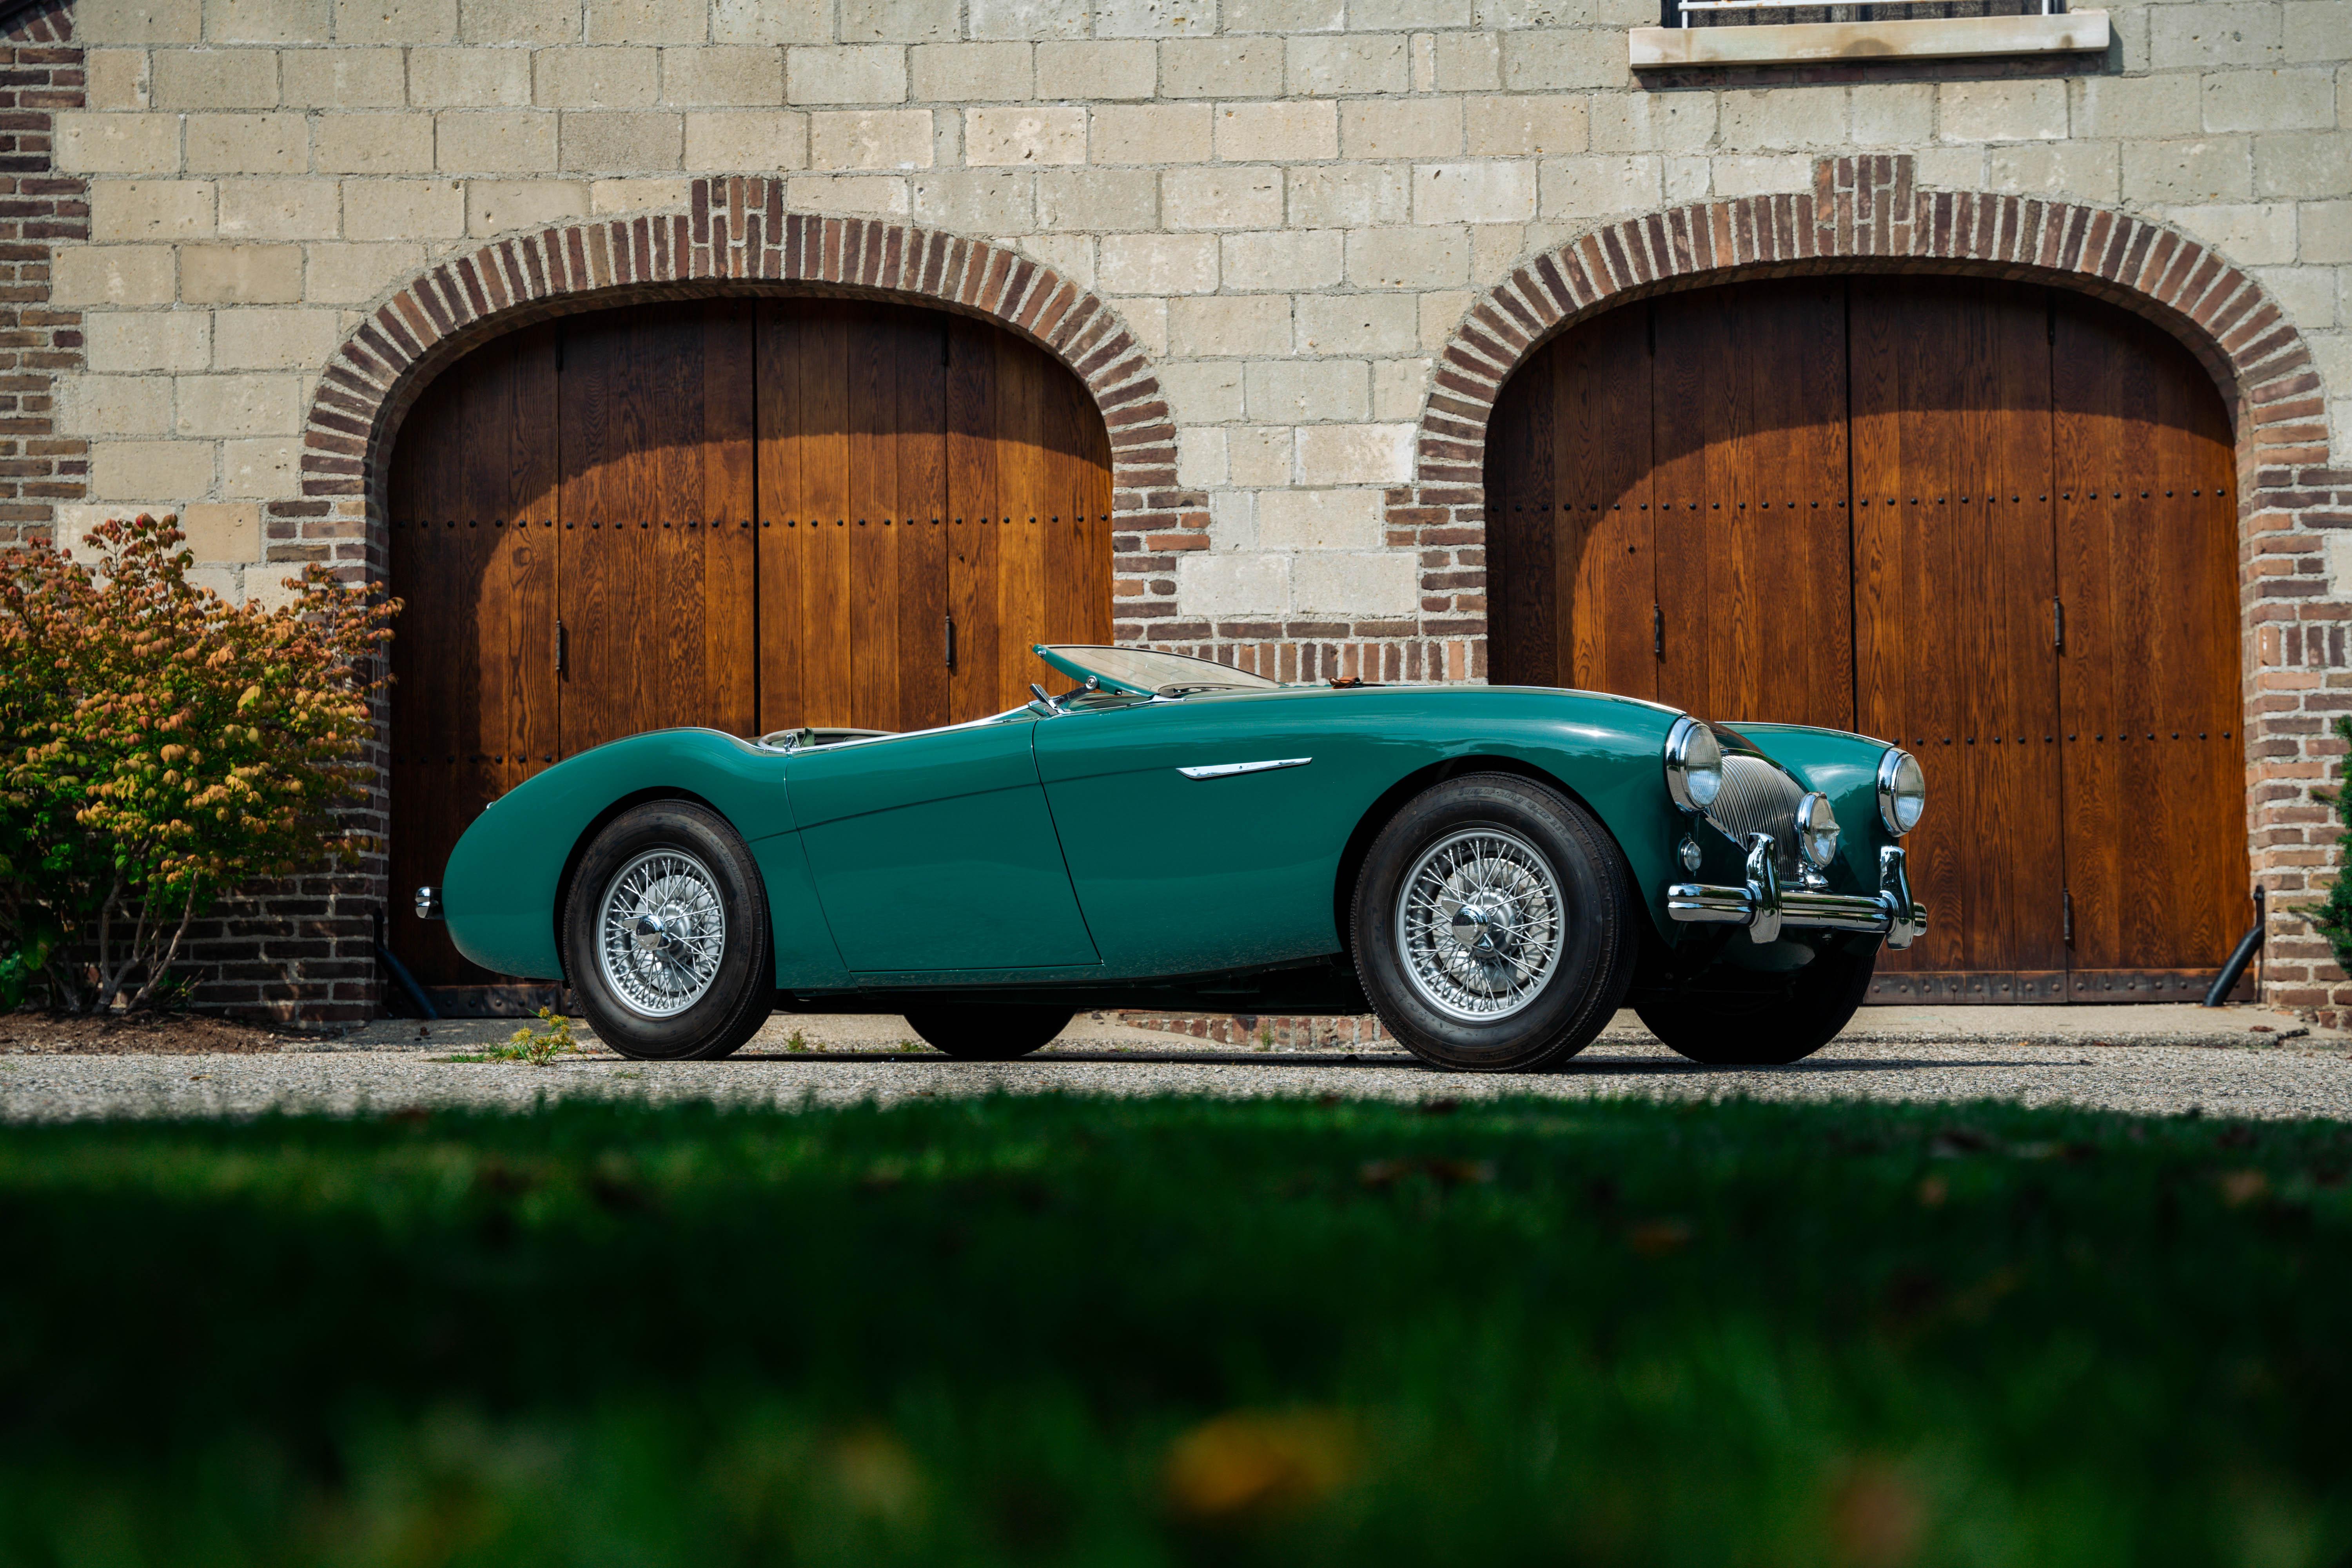 1955 Austin-Healey 100-4 BN-1 Roadster For Sale | Vintage Driving Machines